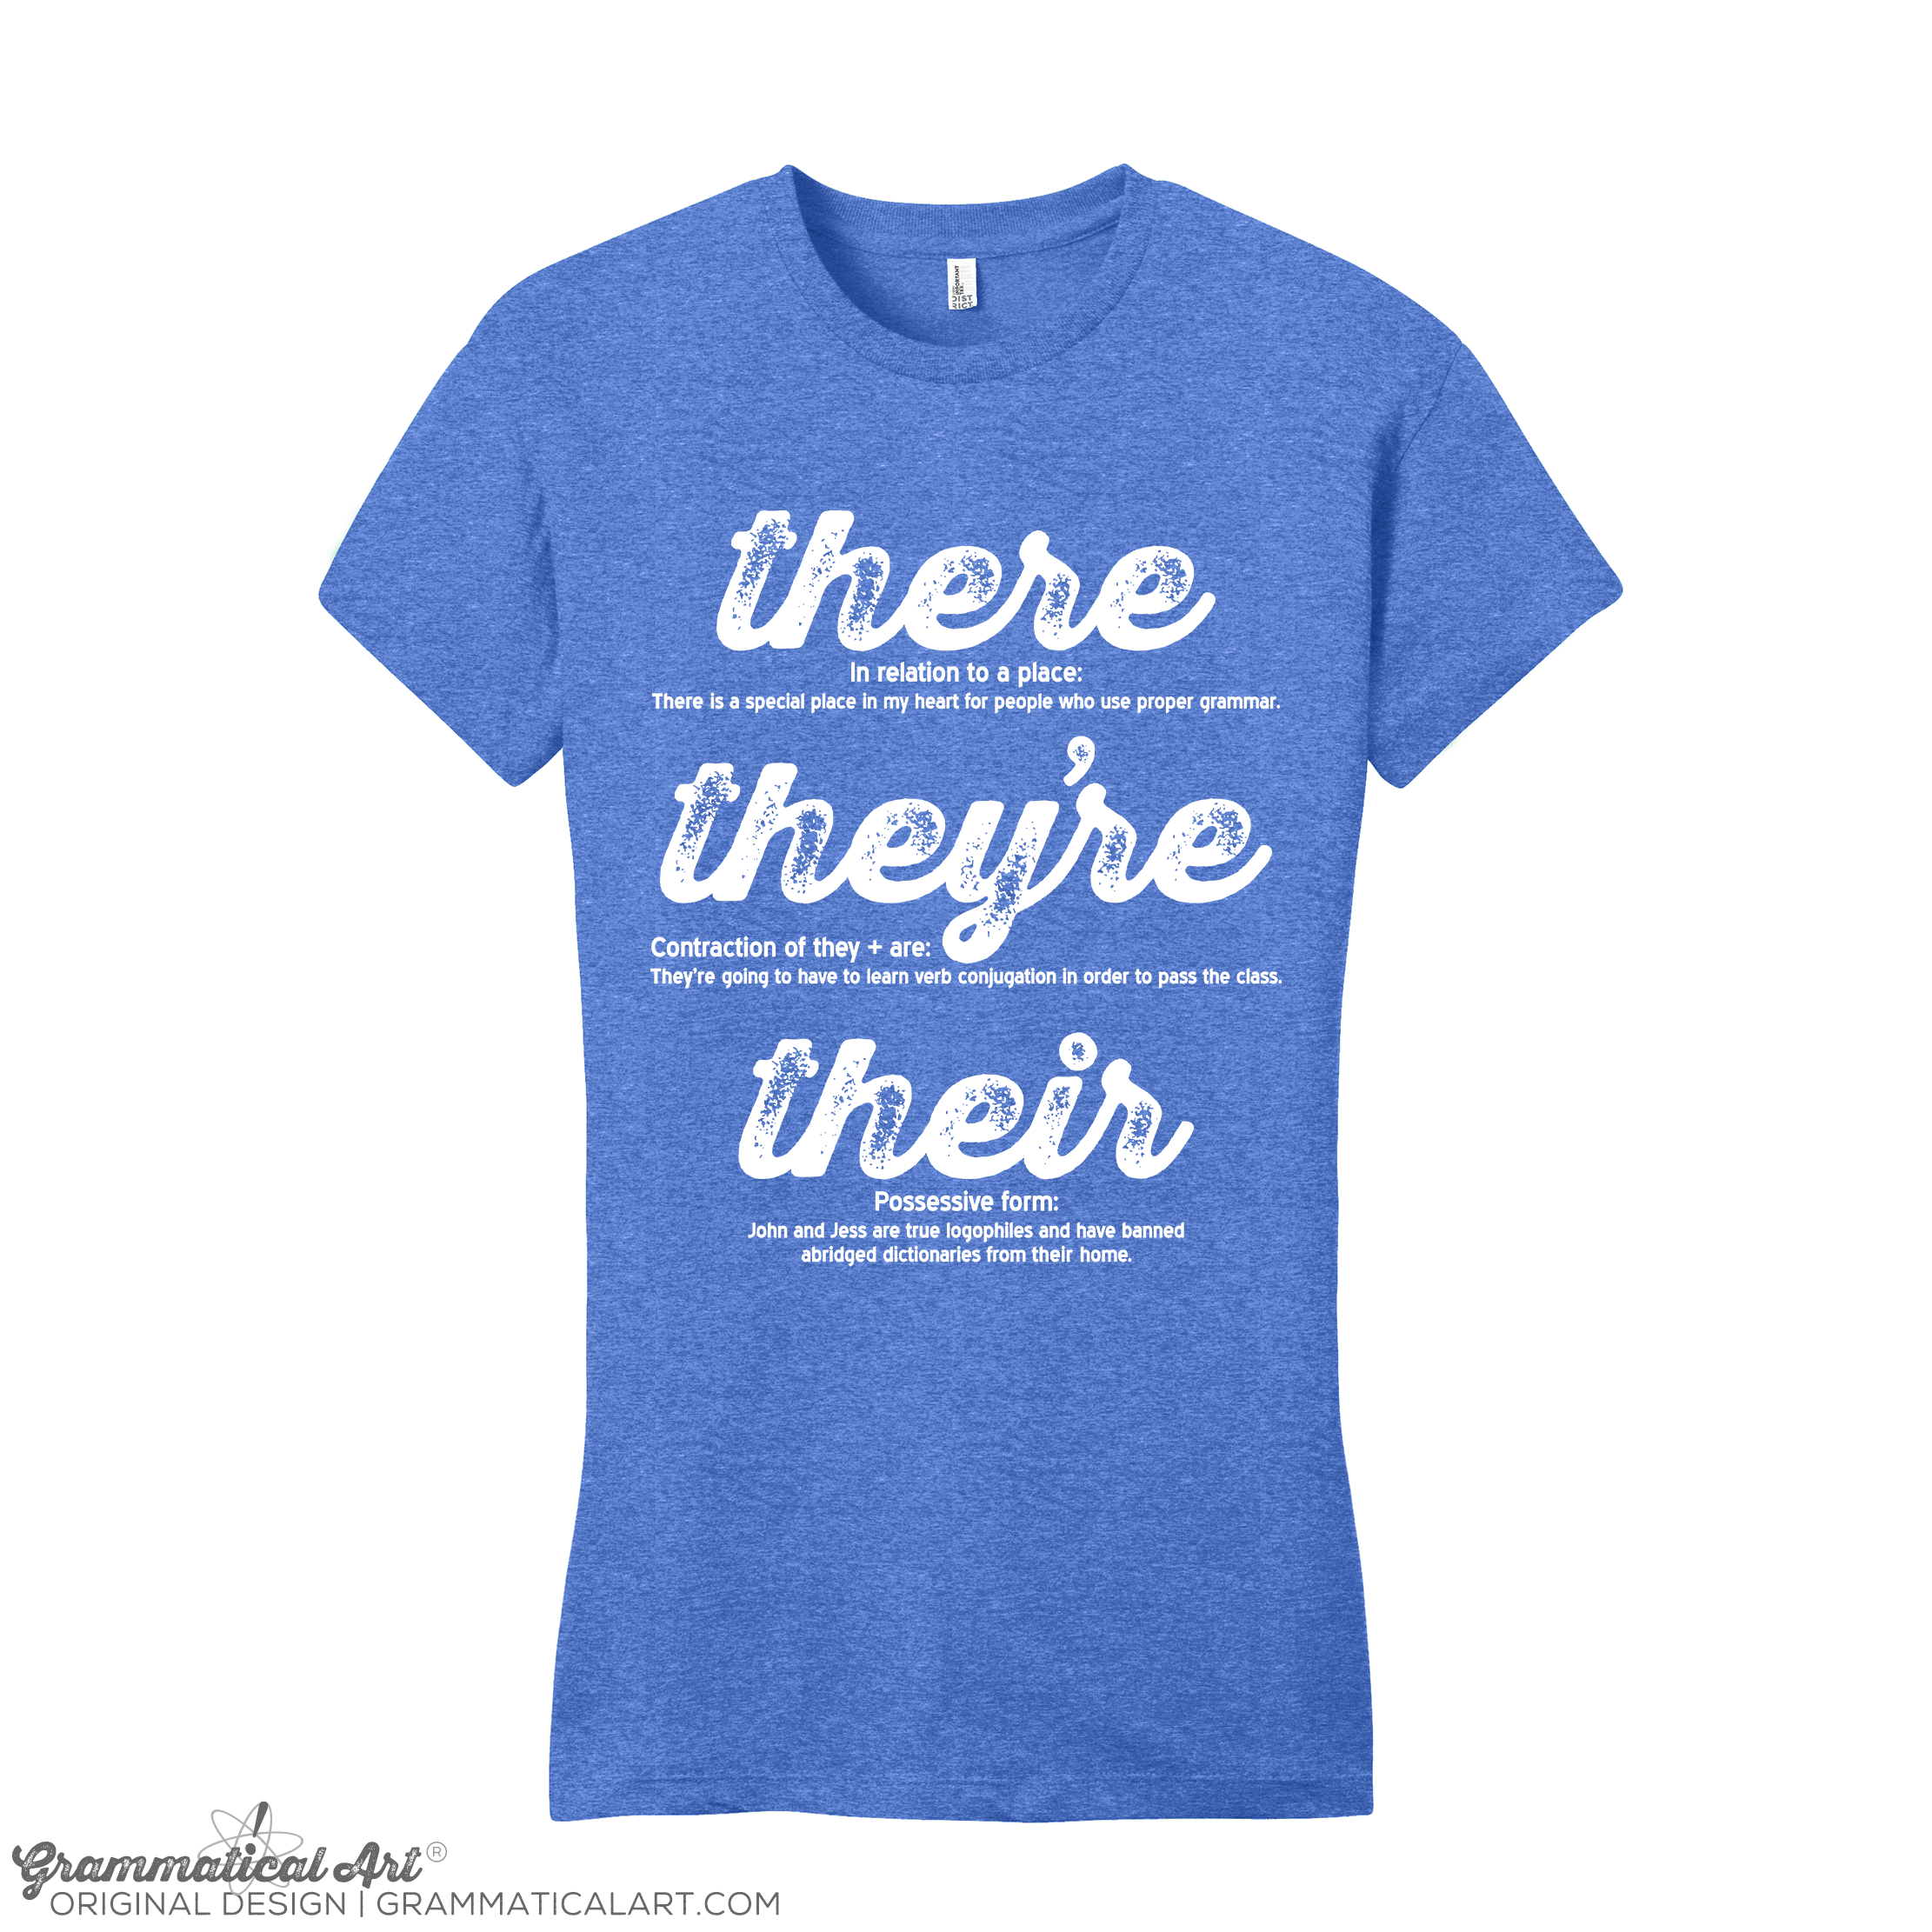 Women’s There They’re Their Shirt | Grammatical Art